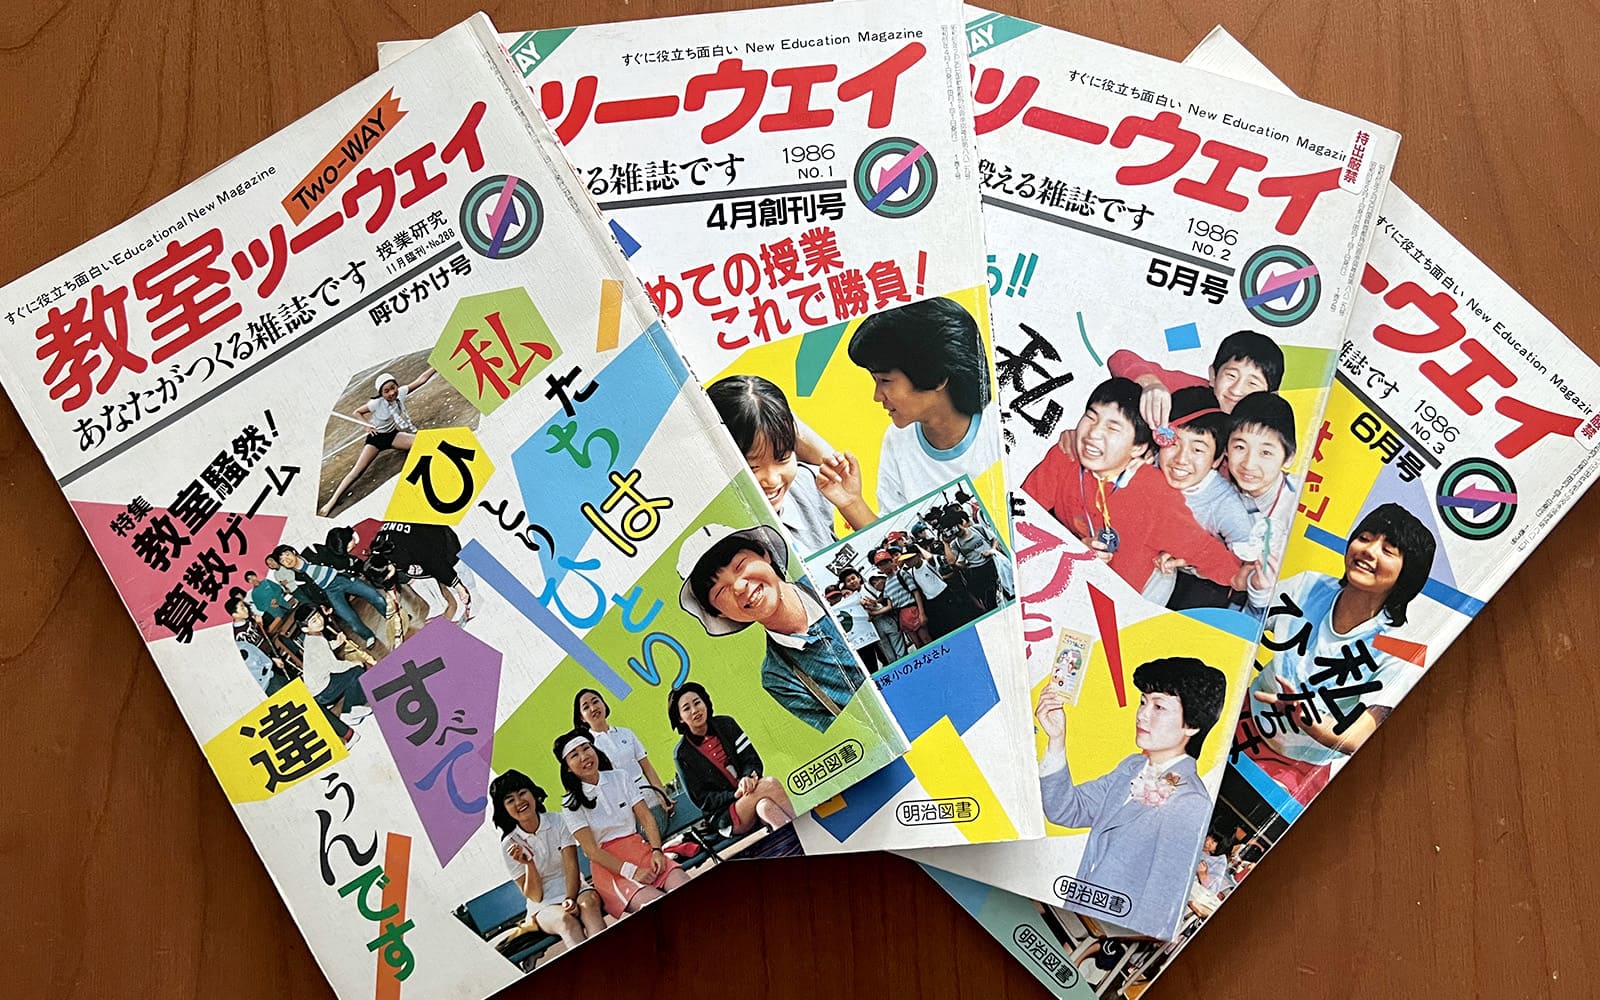 In 2001, Mukoyama established TOSS with the aim of providing “The “Kyoshistu Two-Way,” a monthly magazine with Mukoyama as its editor-in-chief, achieved an extraordinary circulation of 30,000 copies, a rarity for Japanese educational magazines. (The “Kyoshistu Two-Way” 1986)